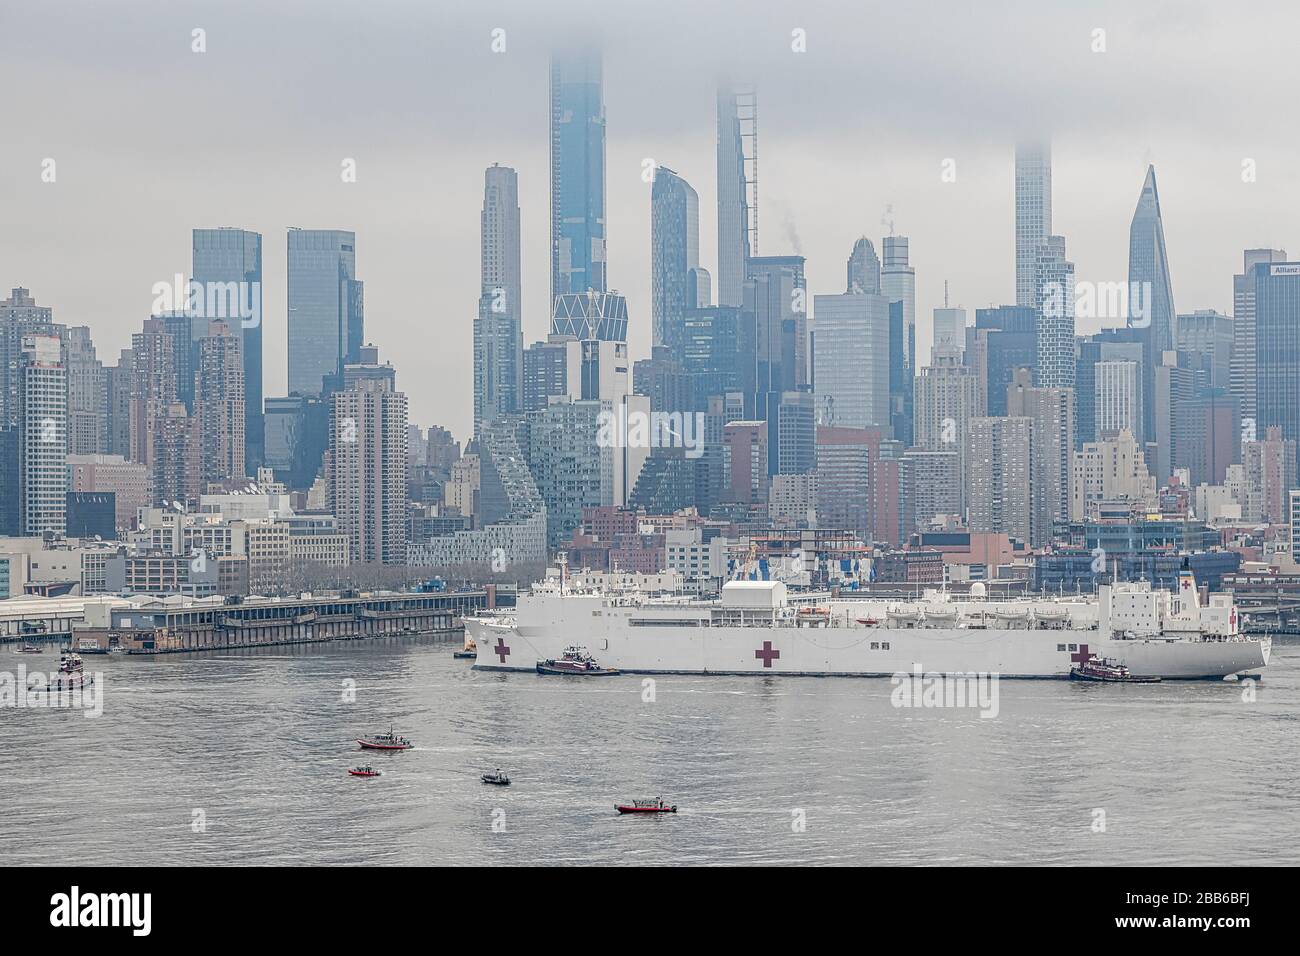 USNS Comfort NYC - Mother nature added to the somber mood as the US Naval Hospital Ship Comfort  arrives in Manhattan in New York City. Stock Photo